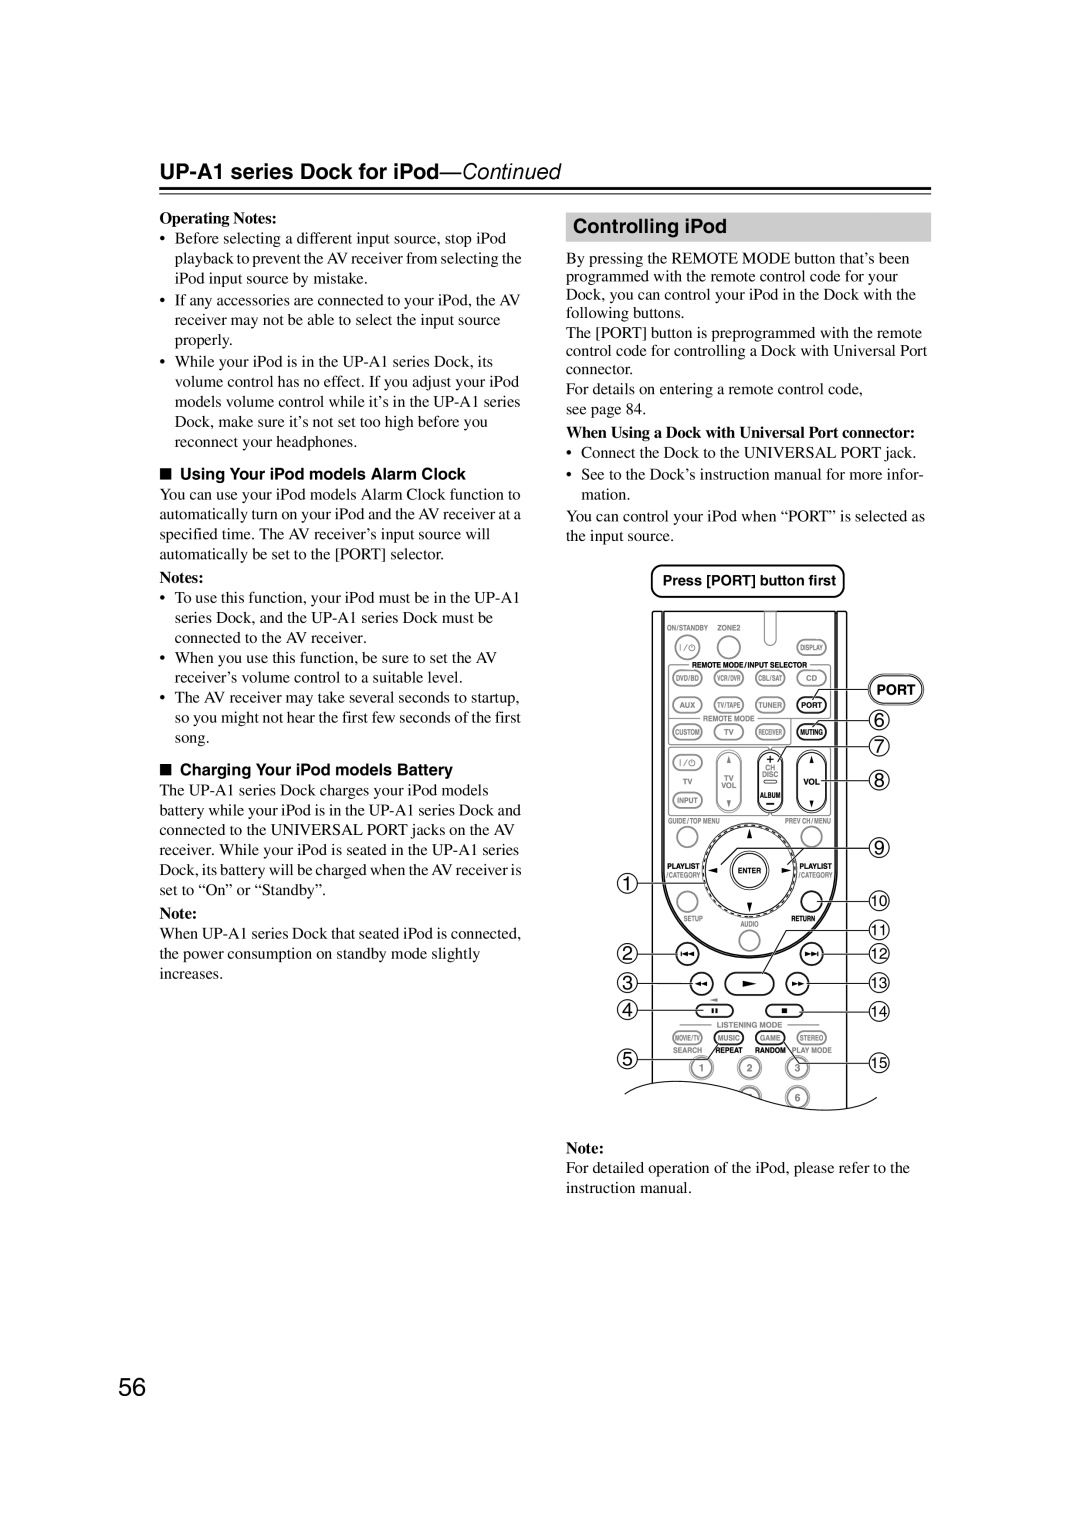 Onkyo TX-SR577, SR507 instruction manual UP-A1series Dock for iPod—Continued 